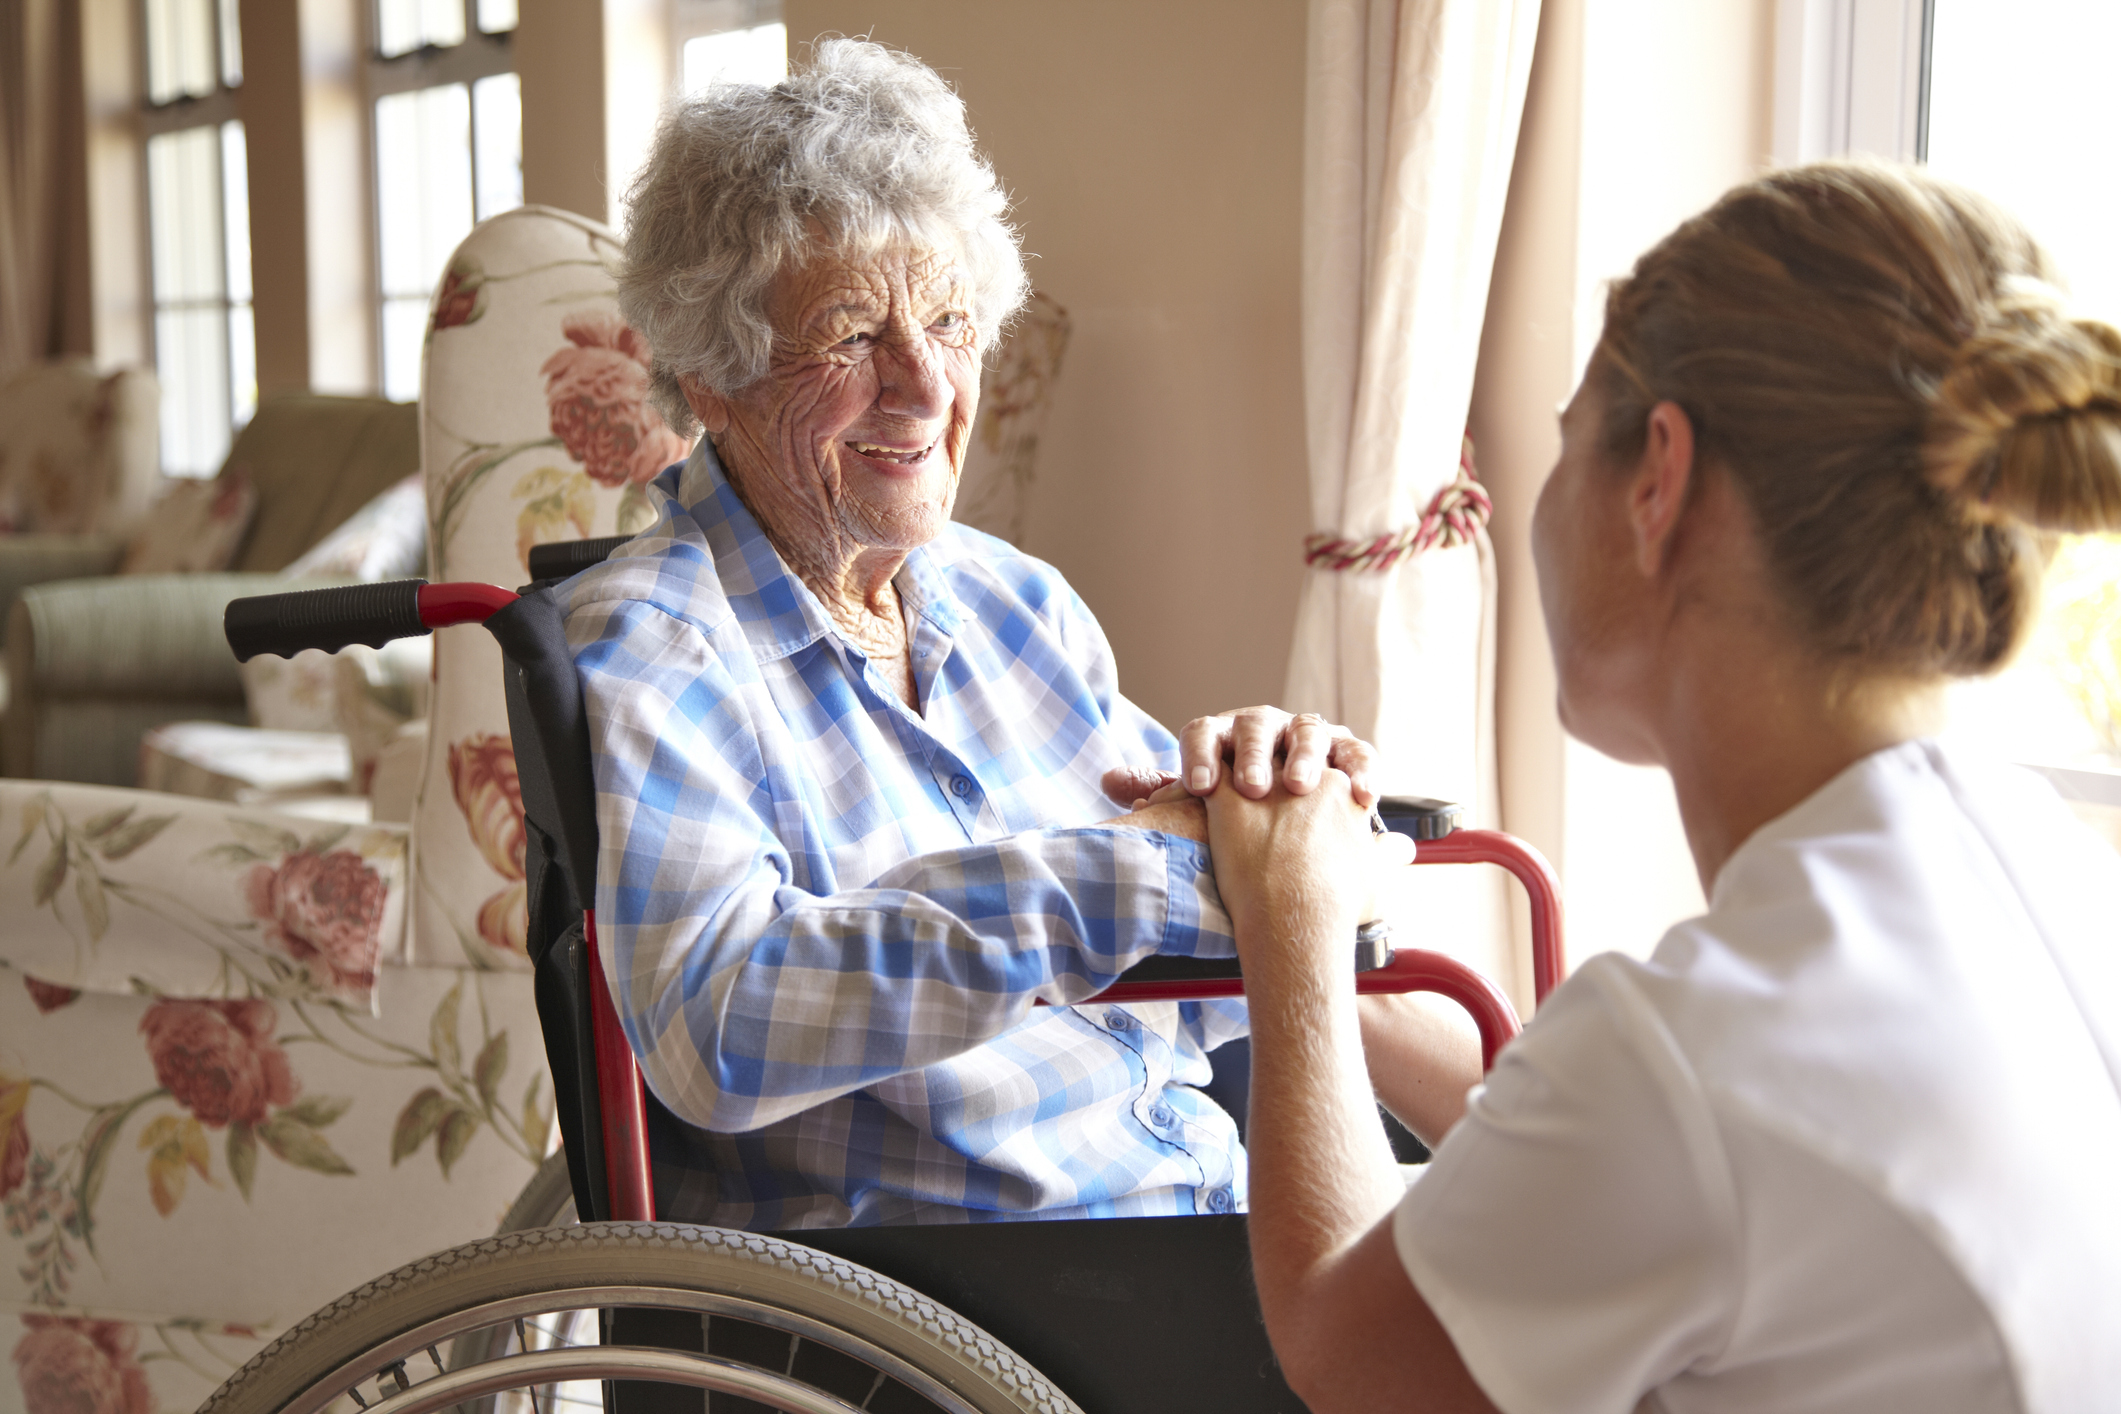 Assisted Living or Home Care